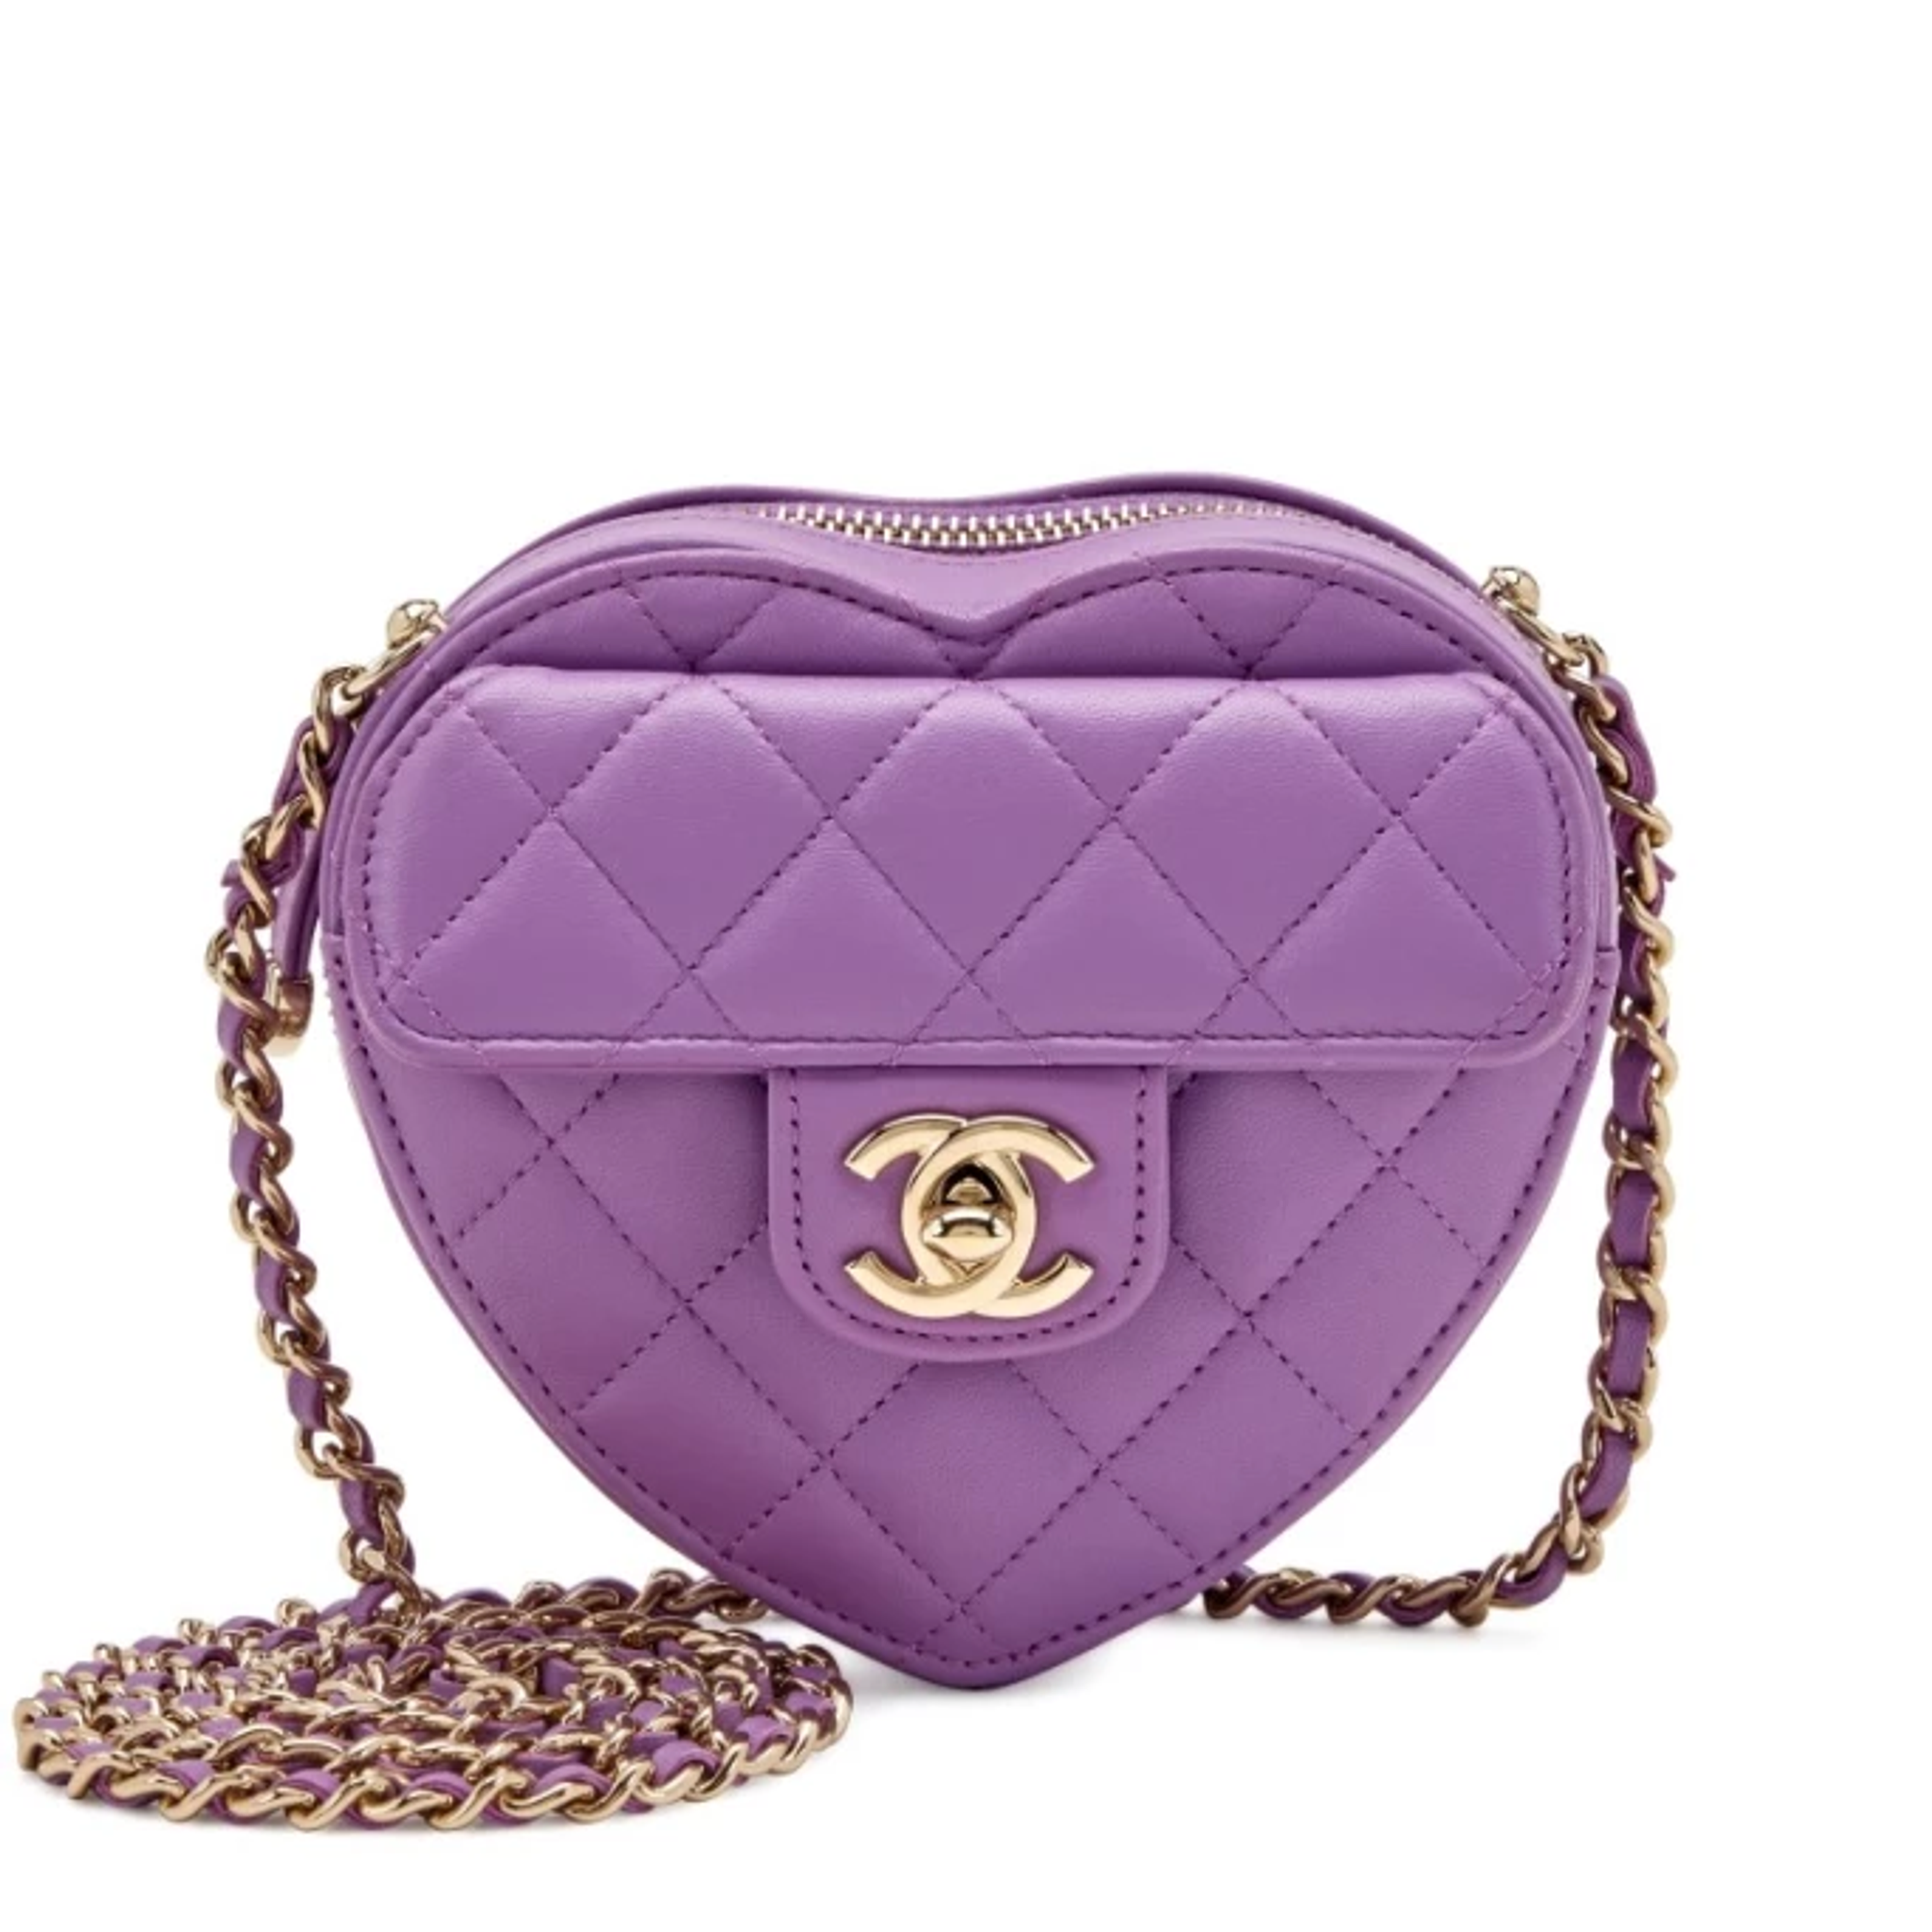 Close up of a purple, quilted heart-shaped Chanel handbag